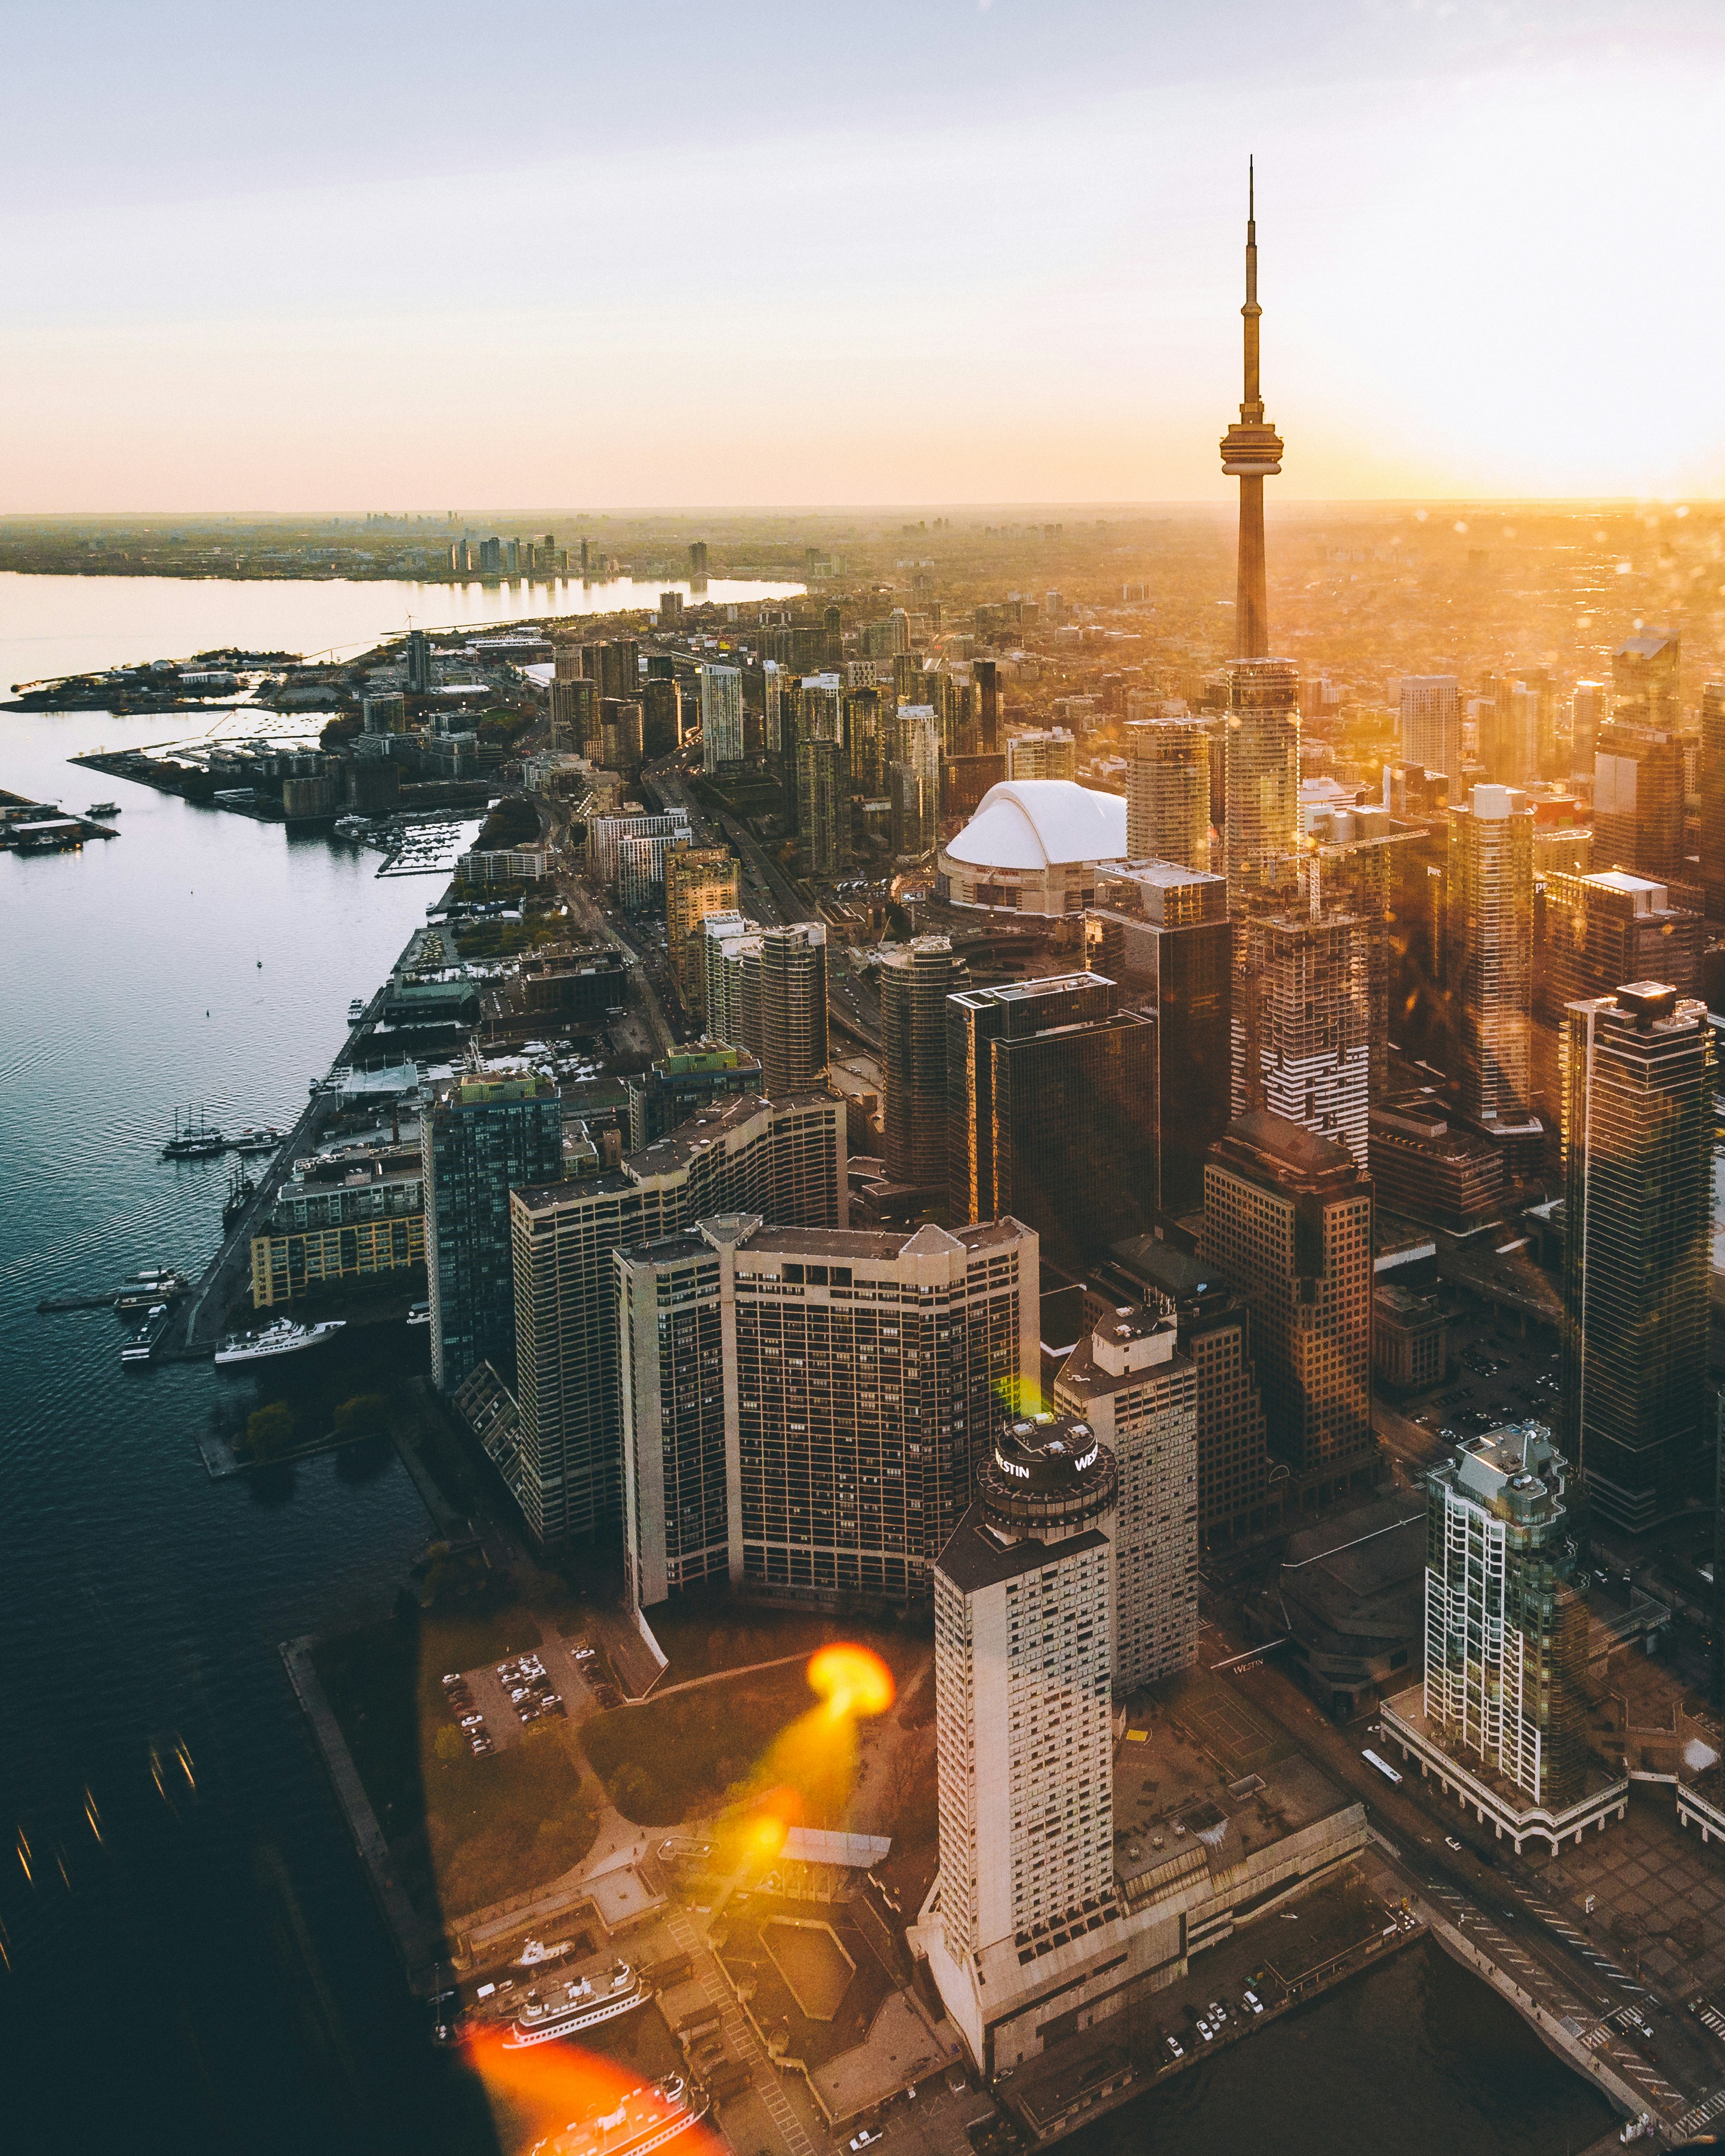 Sunset helicopter tour over downtown Toronto. Another beautiful day in a beautiful city. If you ever get a chance to see a city by air go for it, you wont regret it!